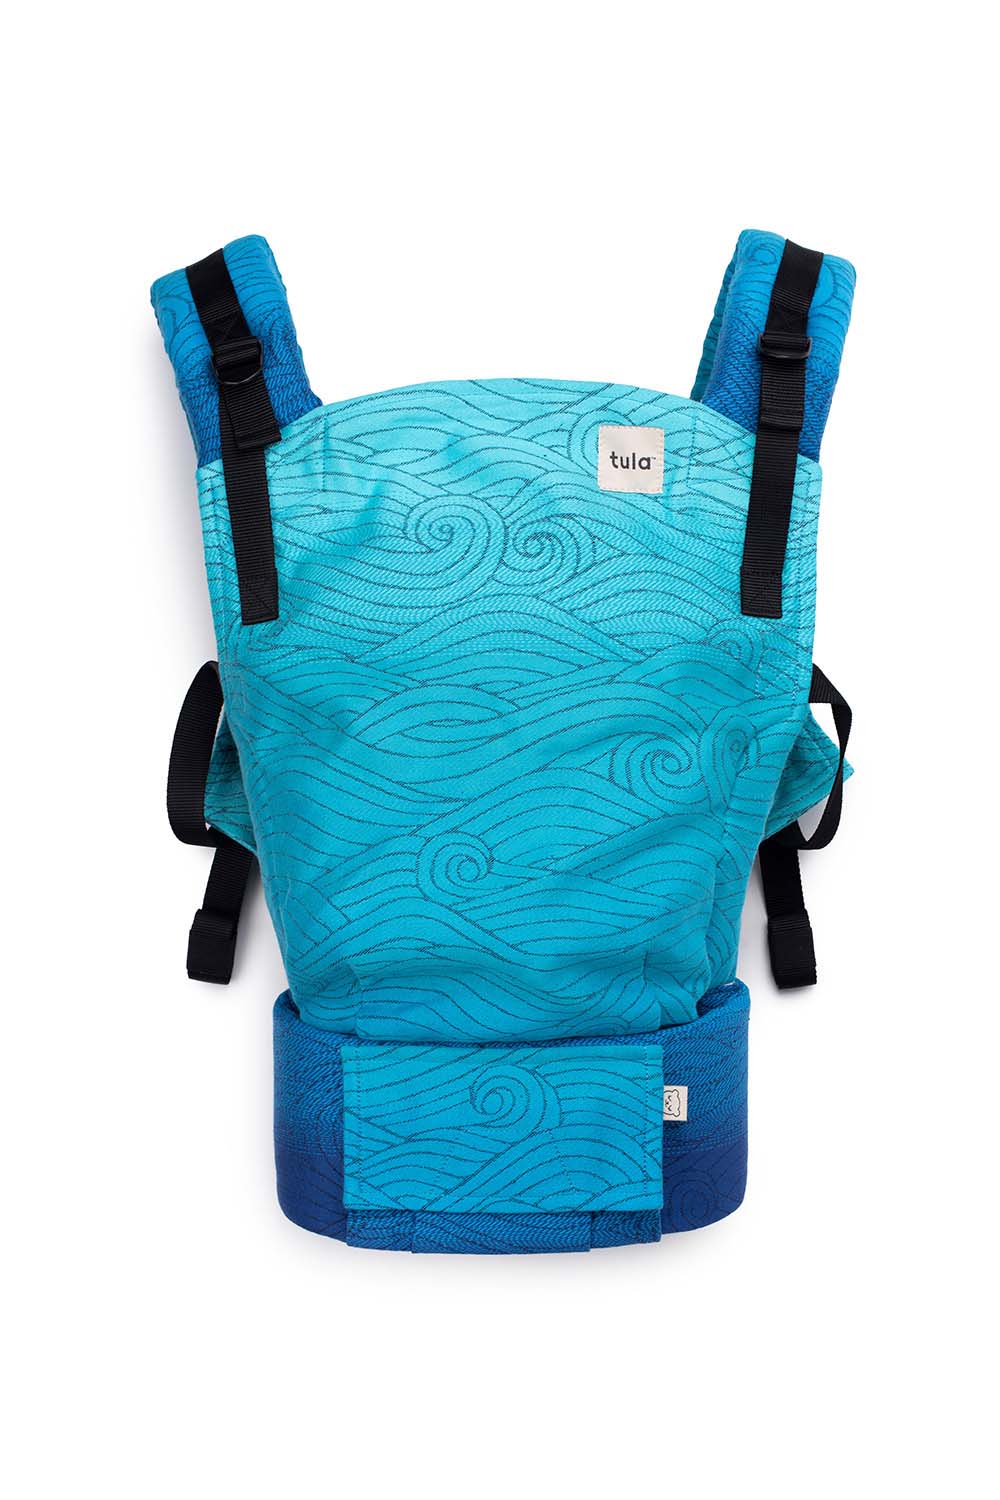 Rei Harbour - Signature Woven Free-to-Grow Baby Carrier